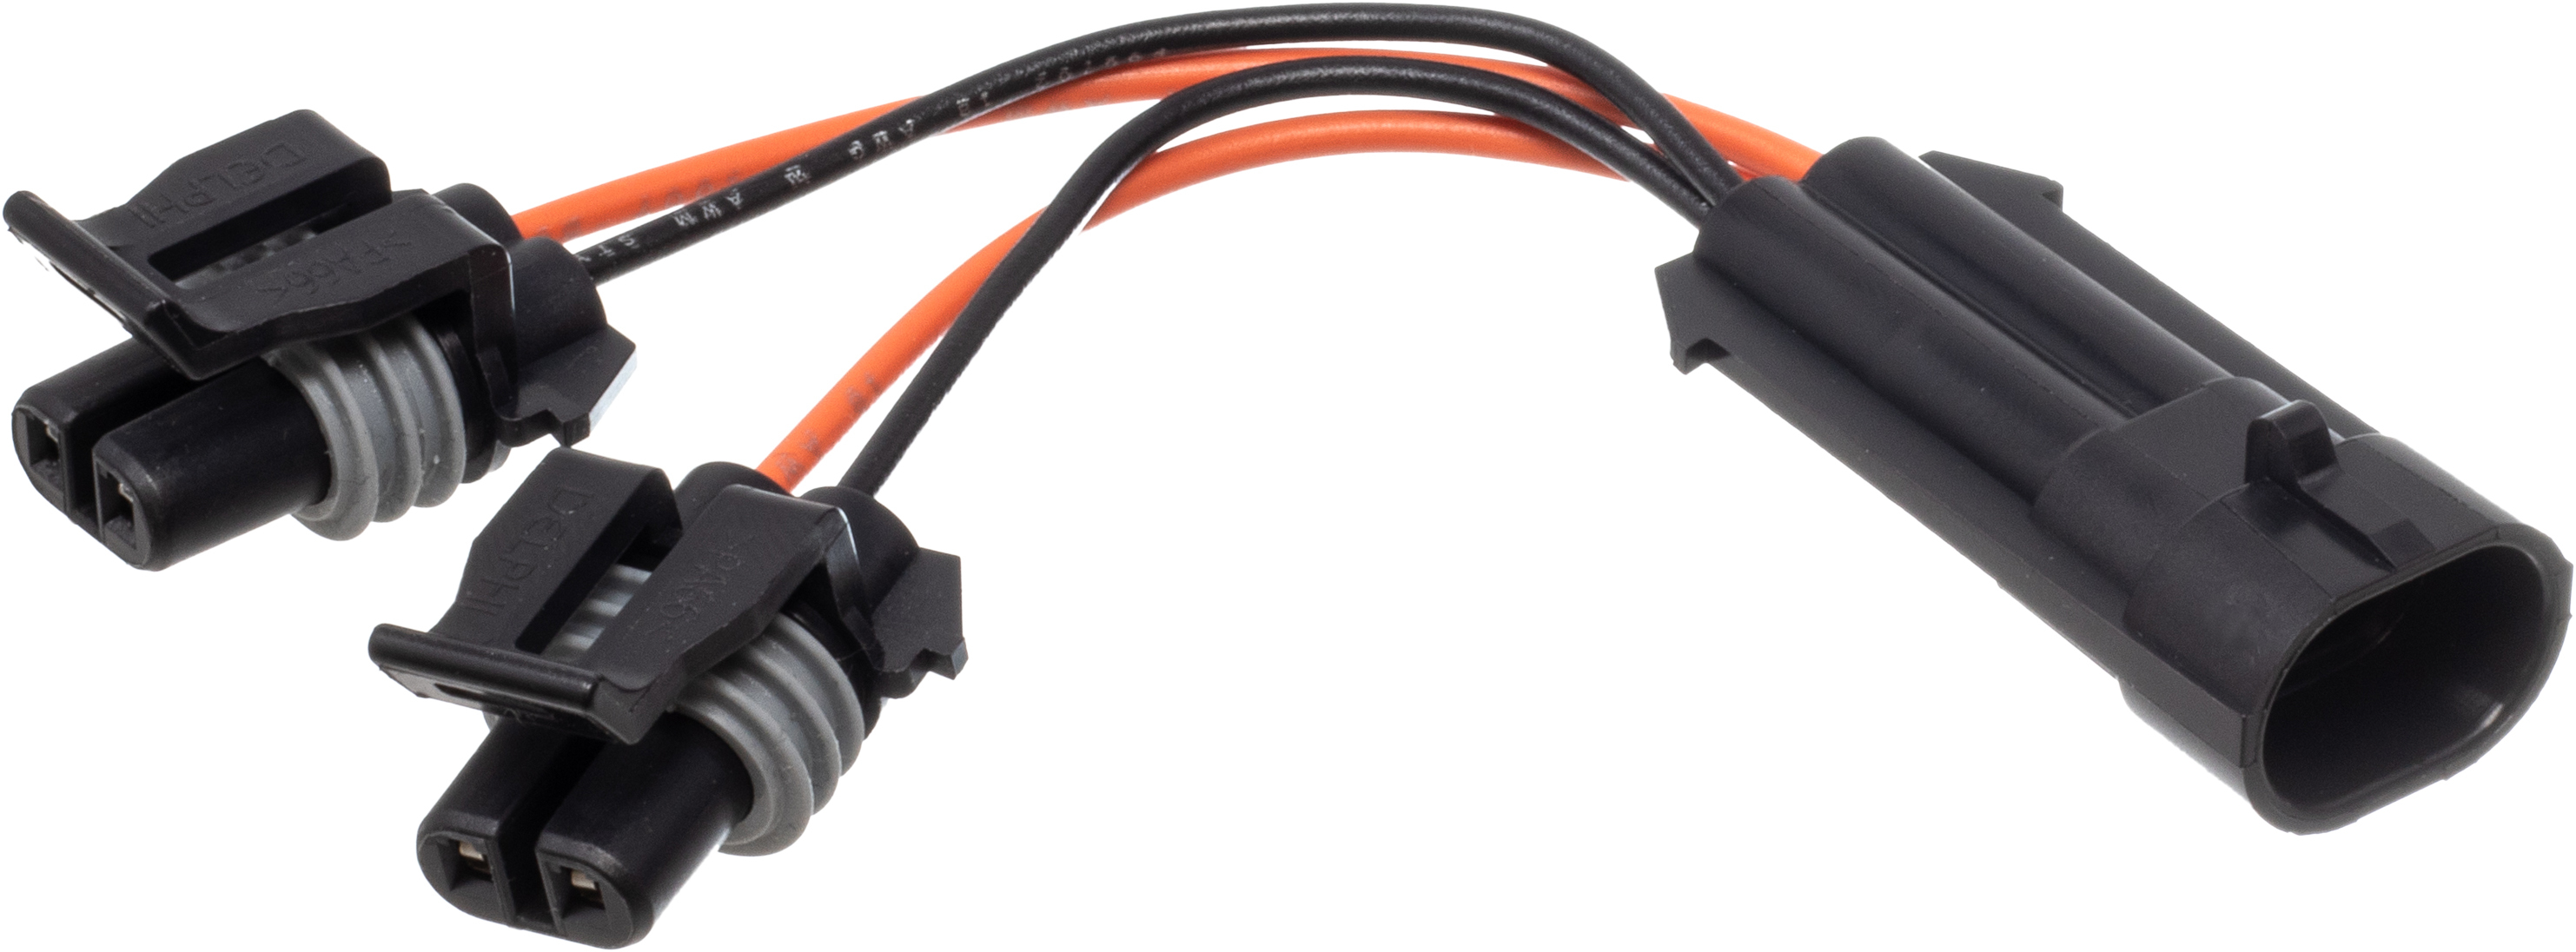 Namz Custom Cycle Products - Y Power Adapter Harness 14-17 Indian Models - N-IPYH-E